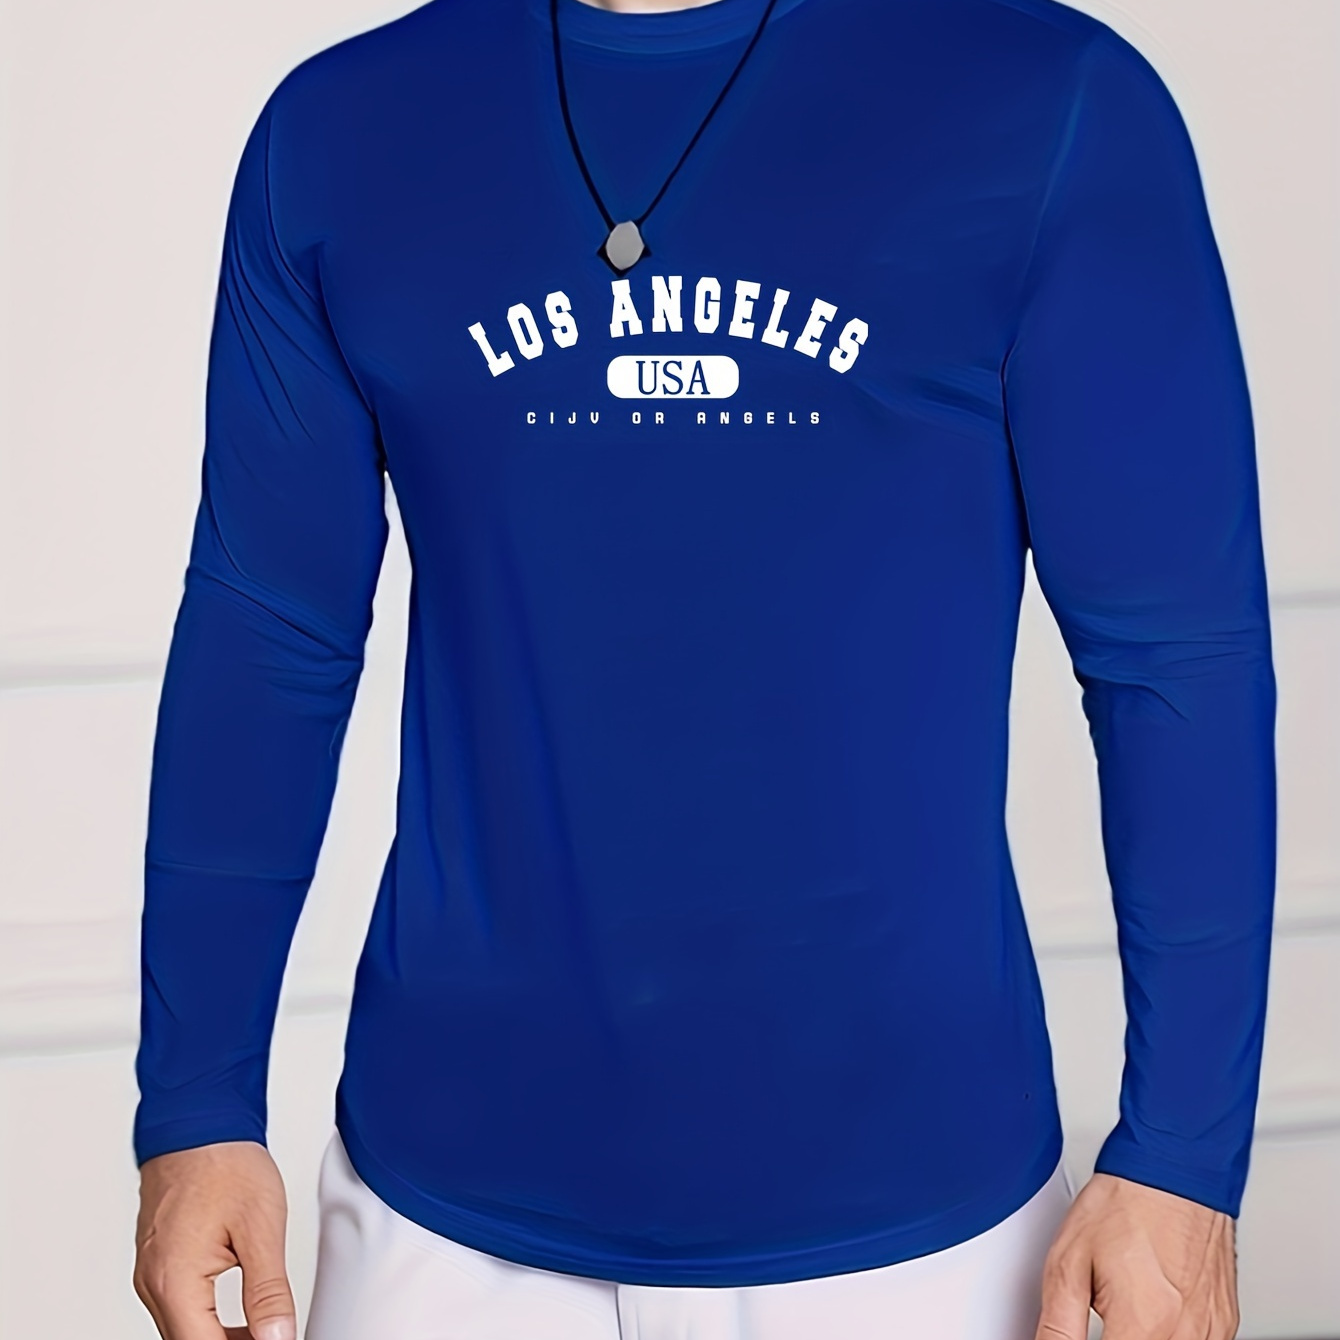 

Men's Long Sleeve T-shirt Casual Loose Fit Fashion Trendy "los Angeles" Print Tee Crew Neck Top